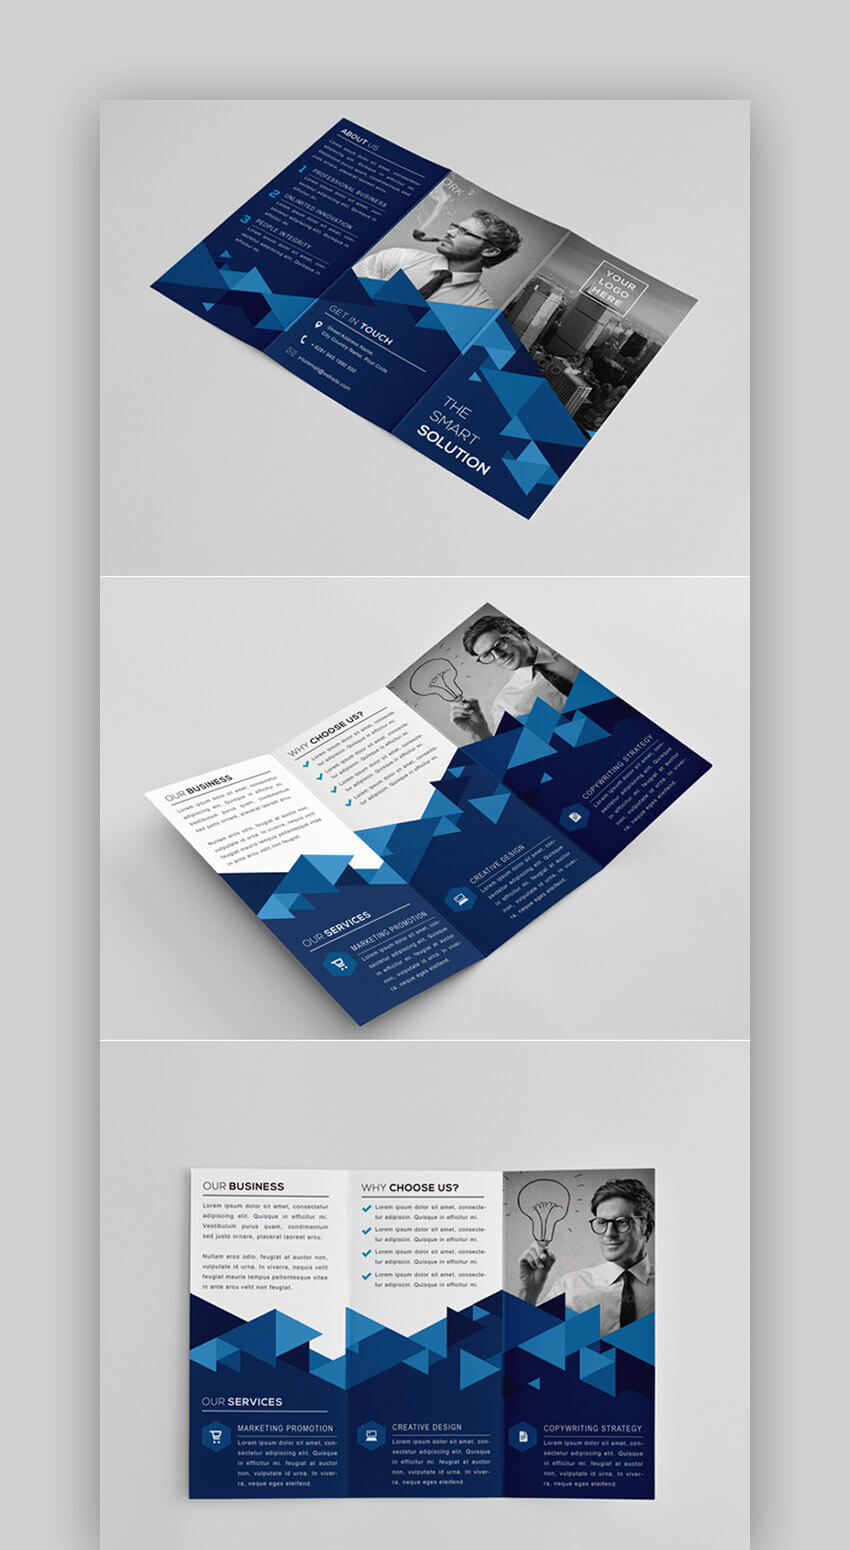 010 The Modern Tri Fold Brochure Template Indesign Indd Throughout Tri Fold Brochure Template Indesign Free Download